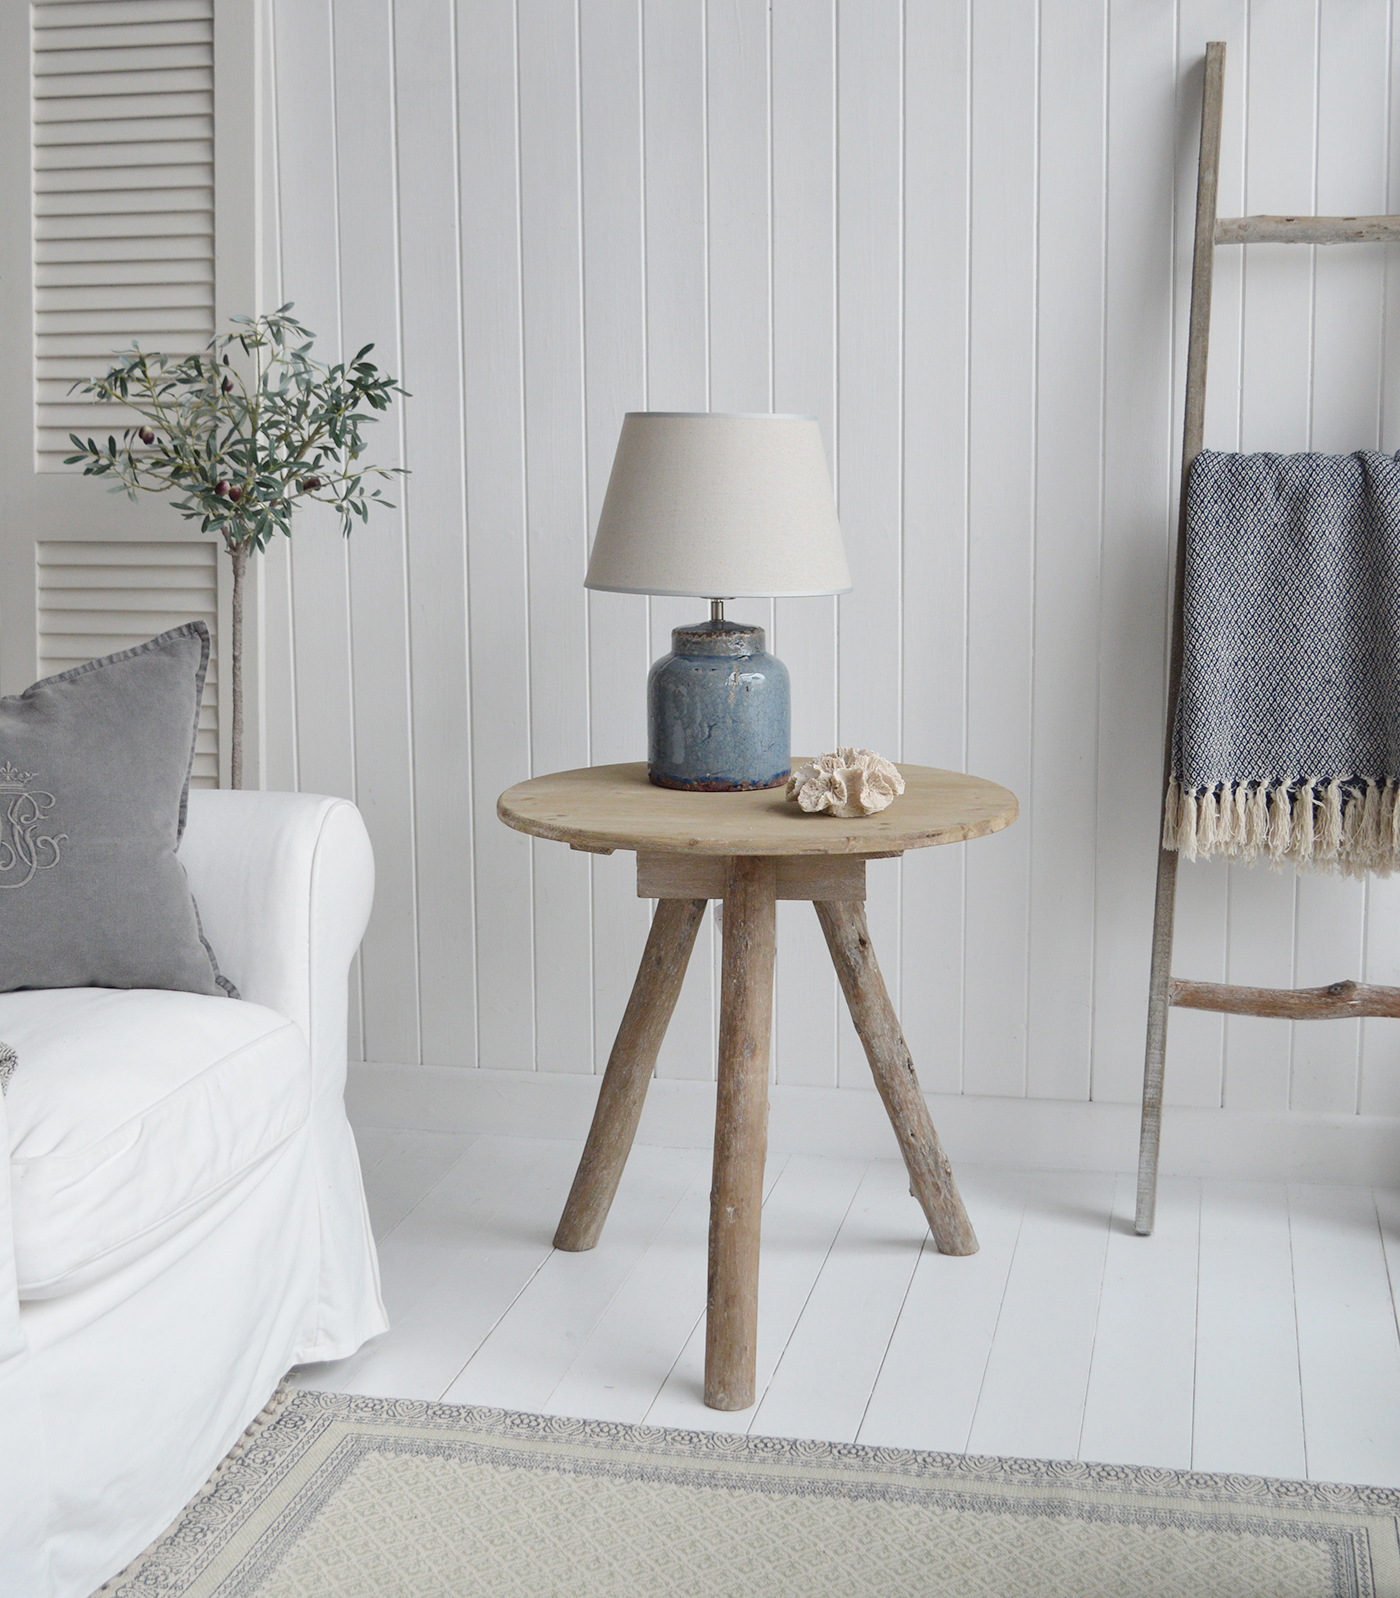 The Driftwood wooden table withthe Blue Compton lamp in a coastal inspired living room